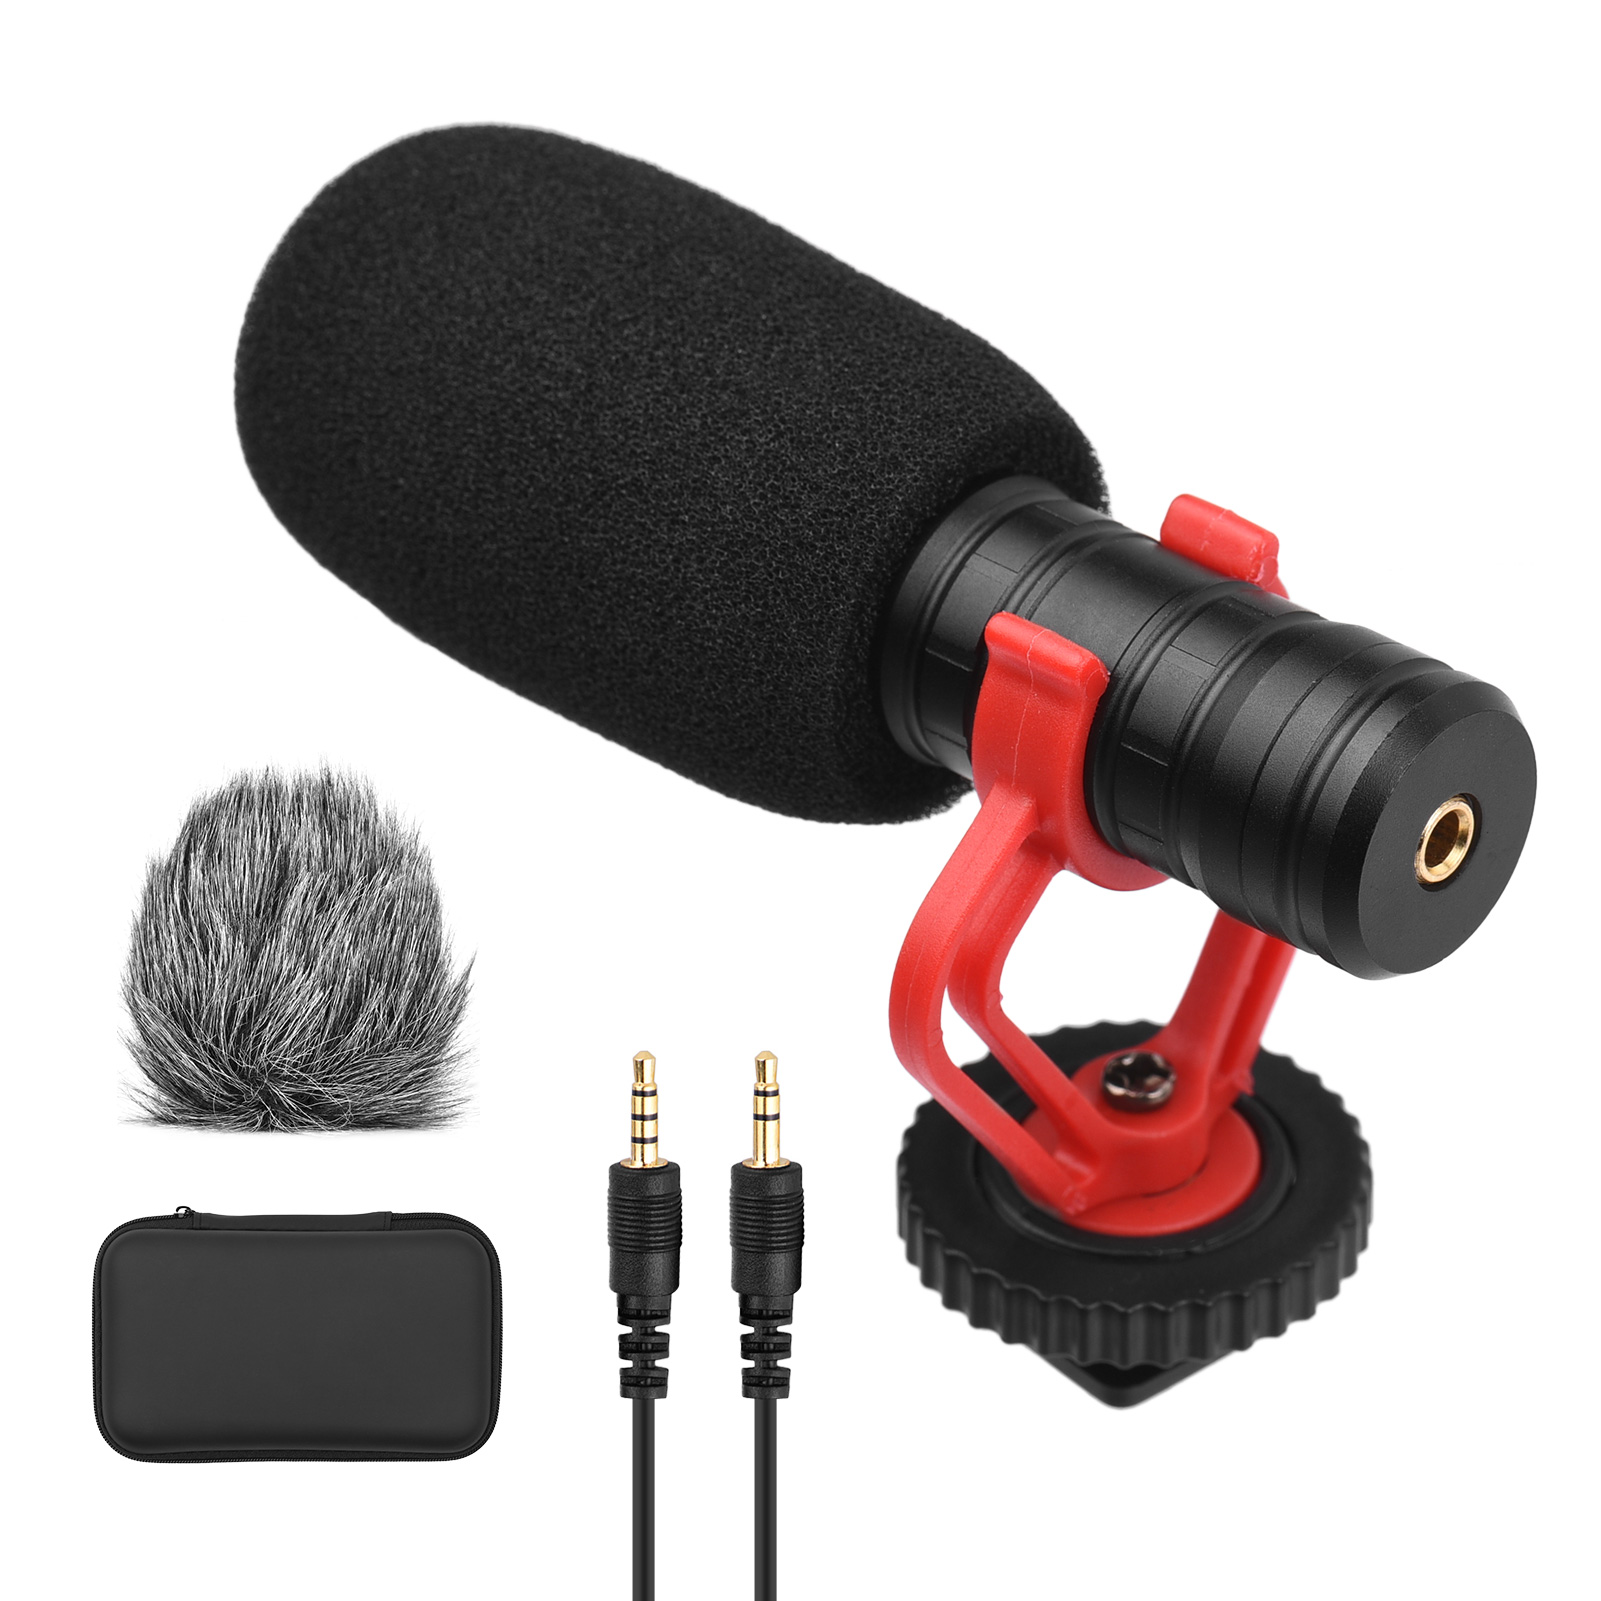 Andoer Microphone Cardioid Condenser Mic with 3.5mm Port - Mount Sponge & Furry Windshield Carrying Case Compatible with Phones for Video Recording Interview - image 1 of 7